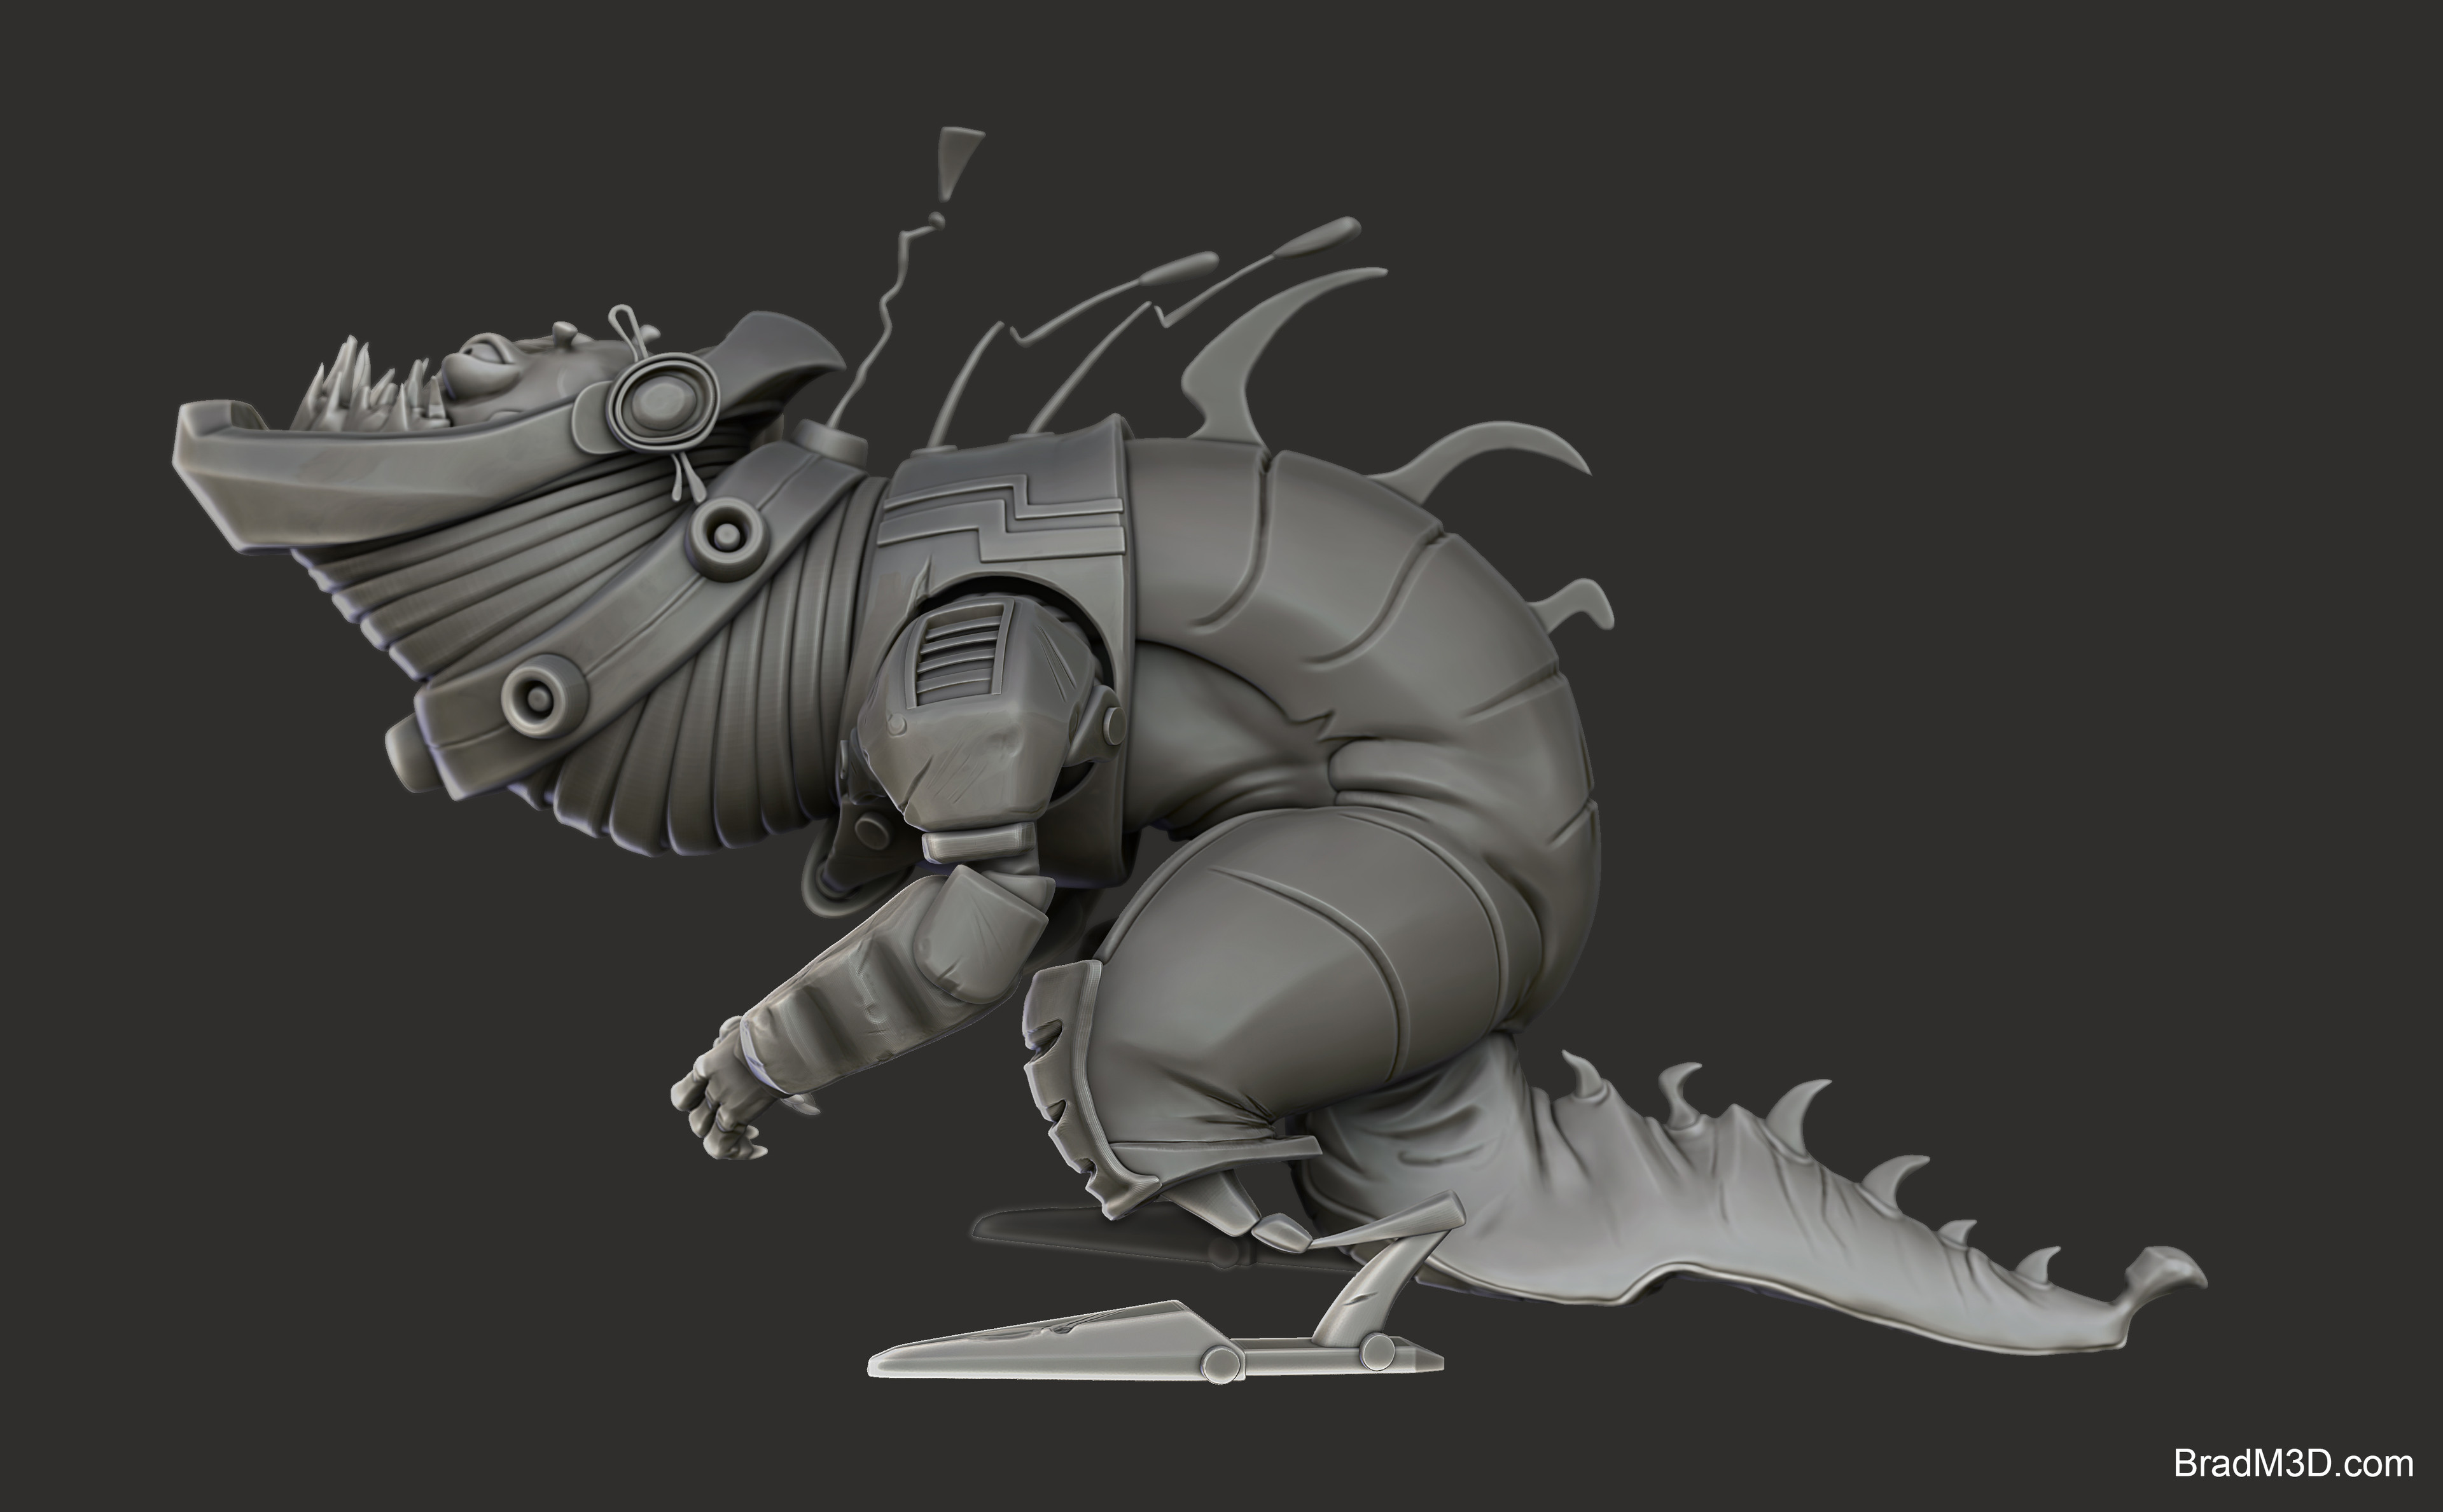 Zbrush: High Poly_02